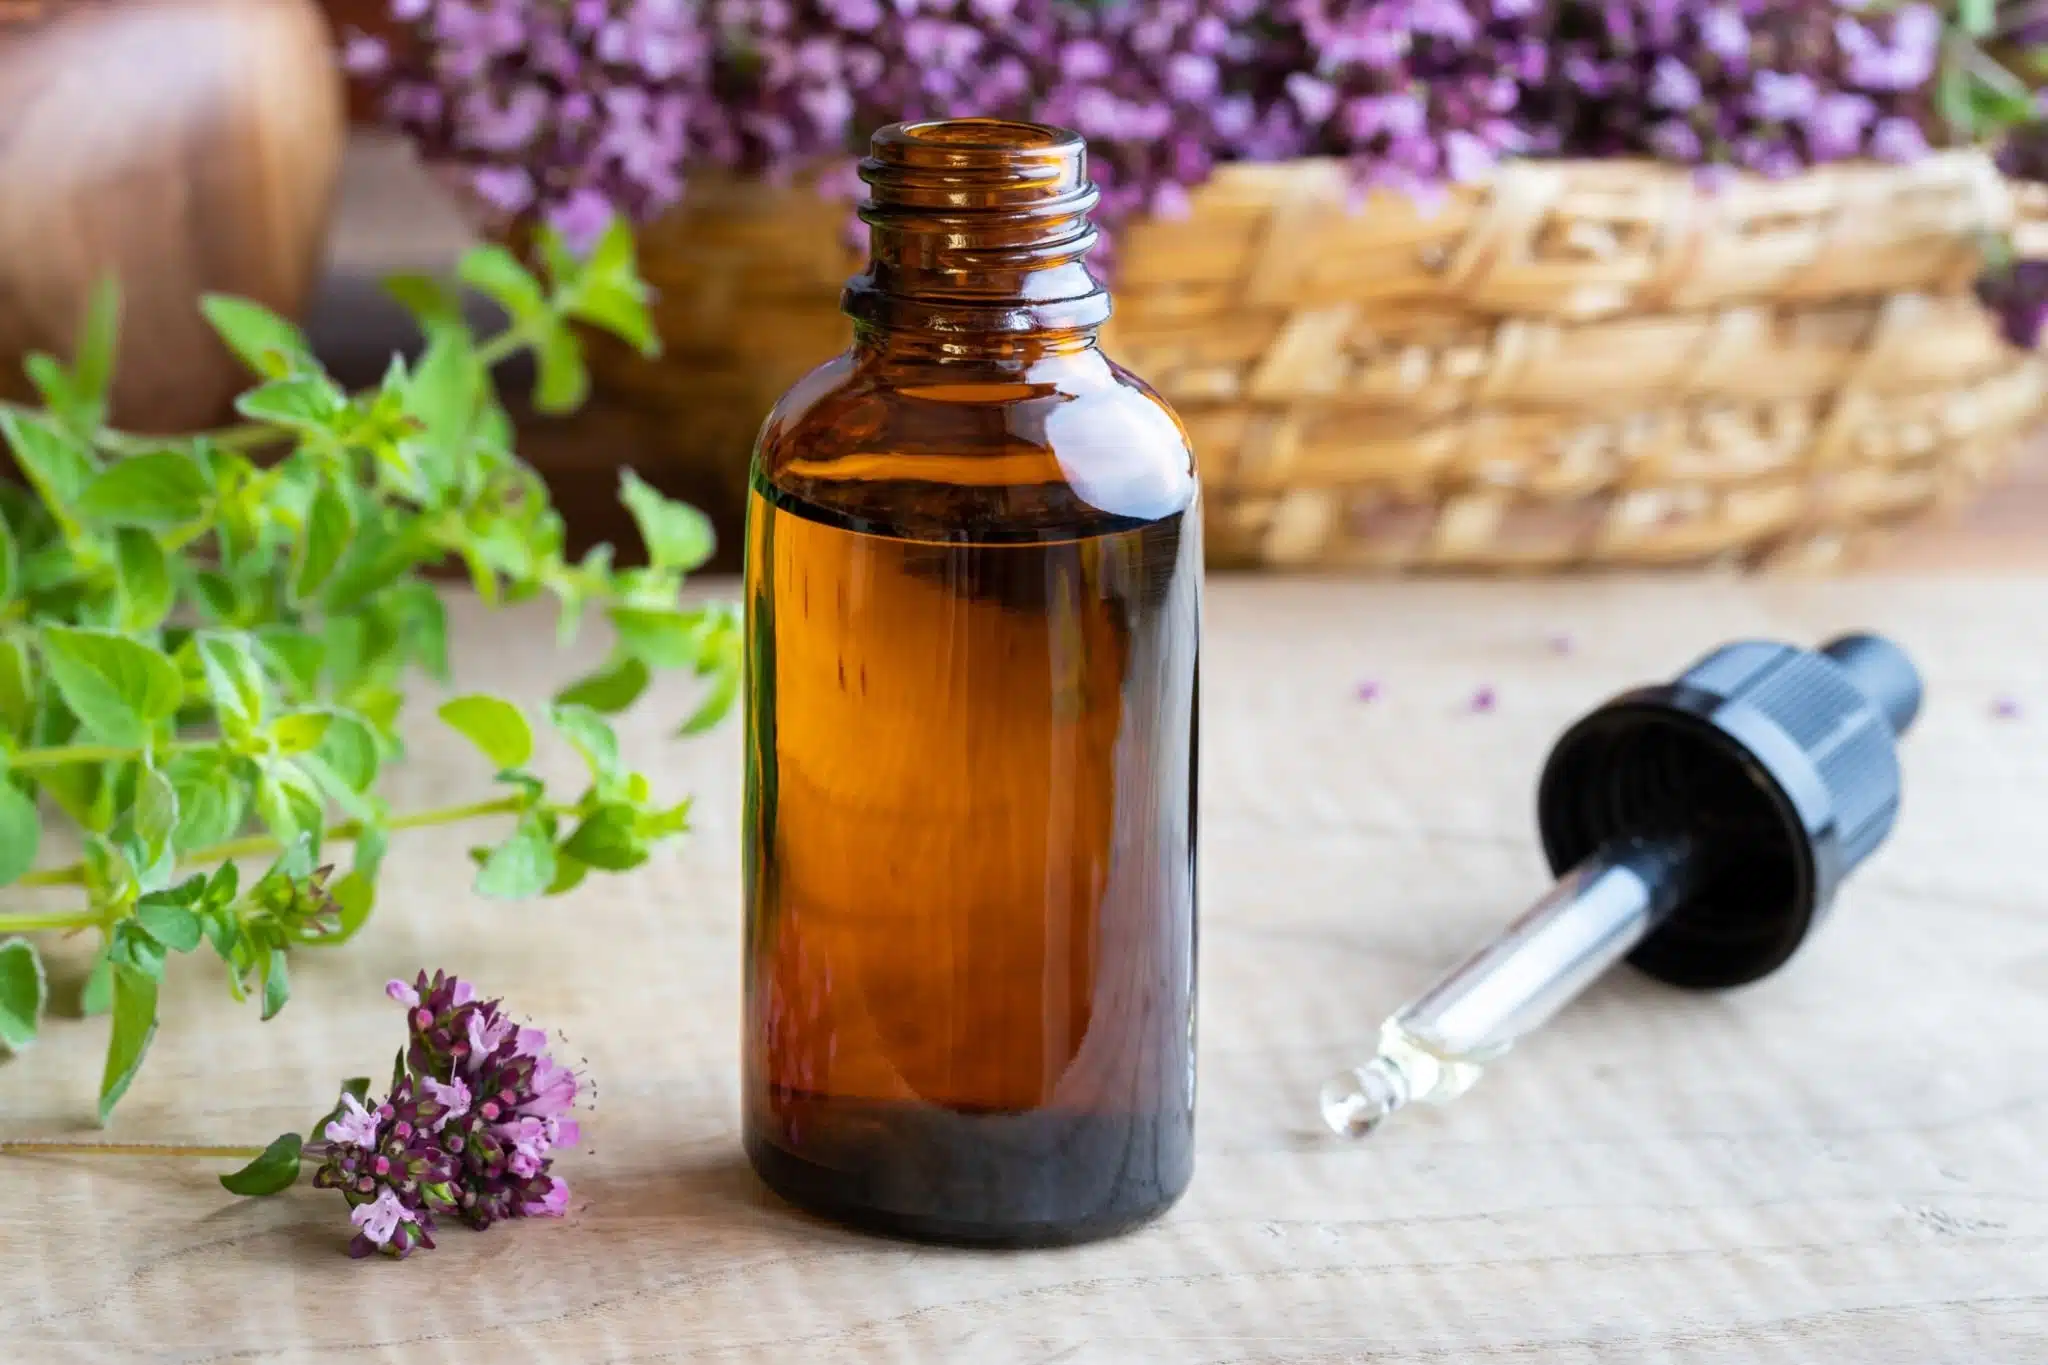 Did You Tried Oregano Oil for Acne Yet?